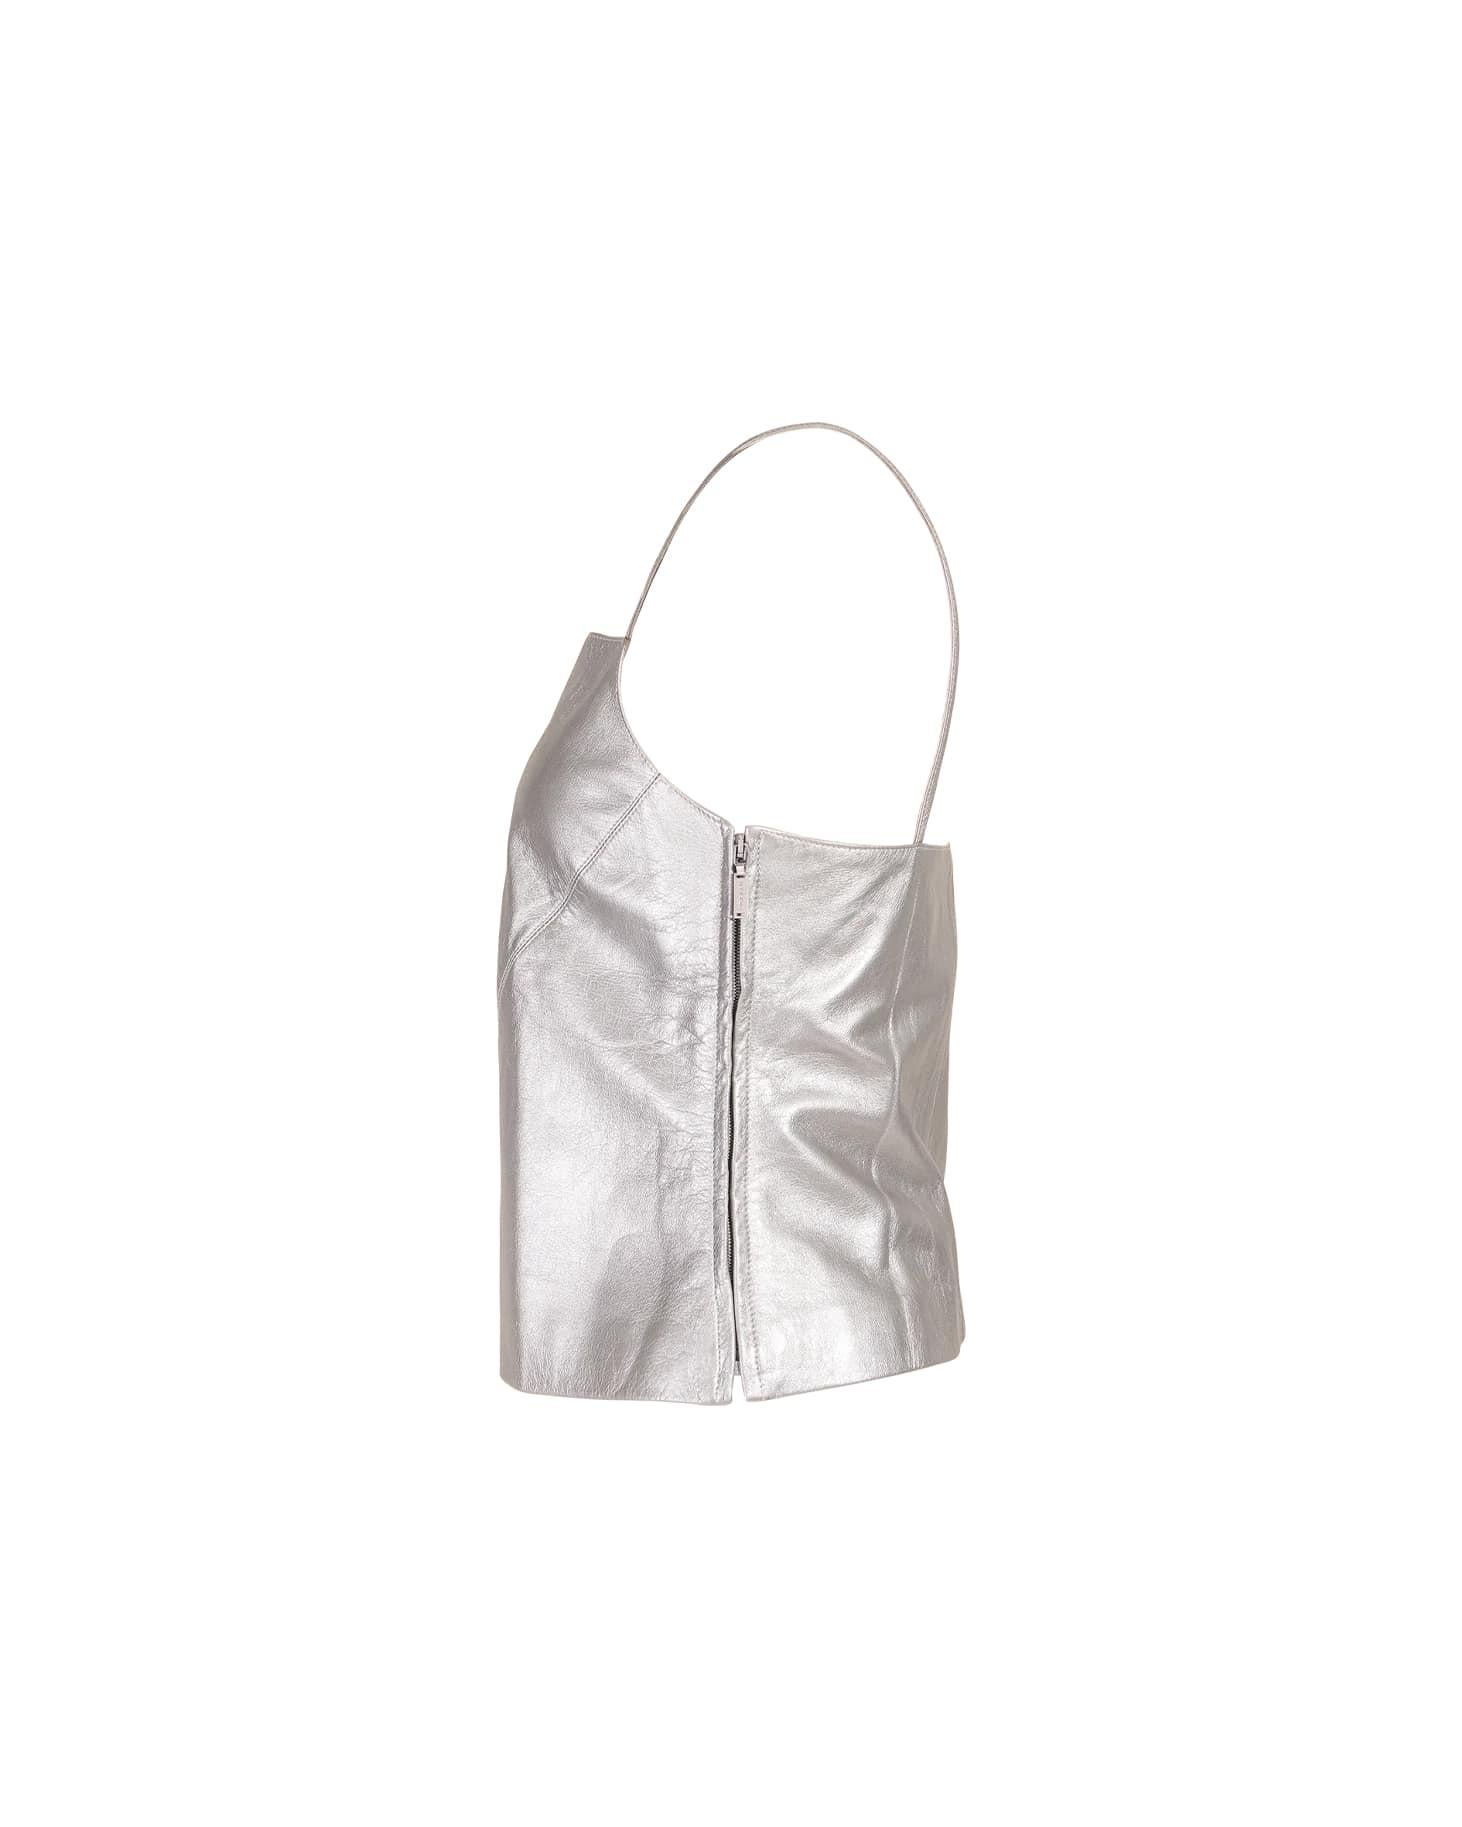 S/S 1999 Chanel metallic silver leather tank top. Silver leather exterior with silk lining. Square neckline, sleeveless top with side zip closure. 
